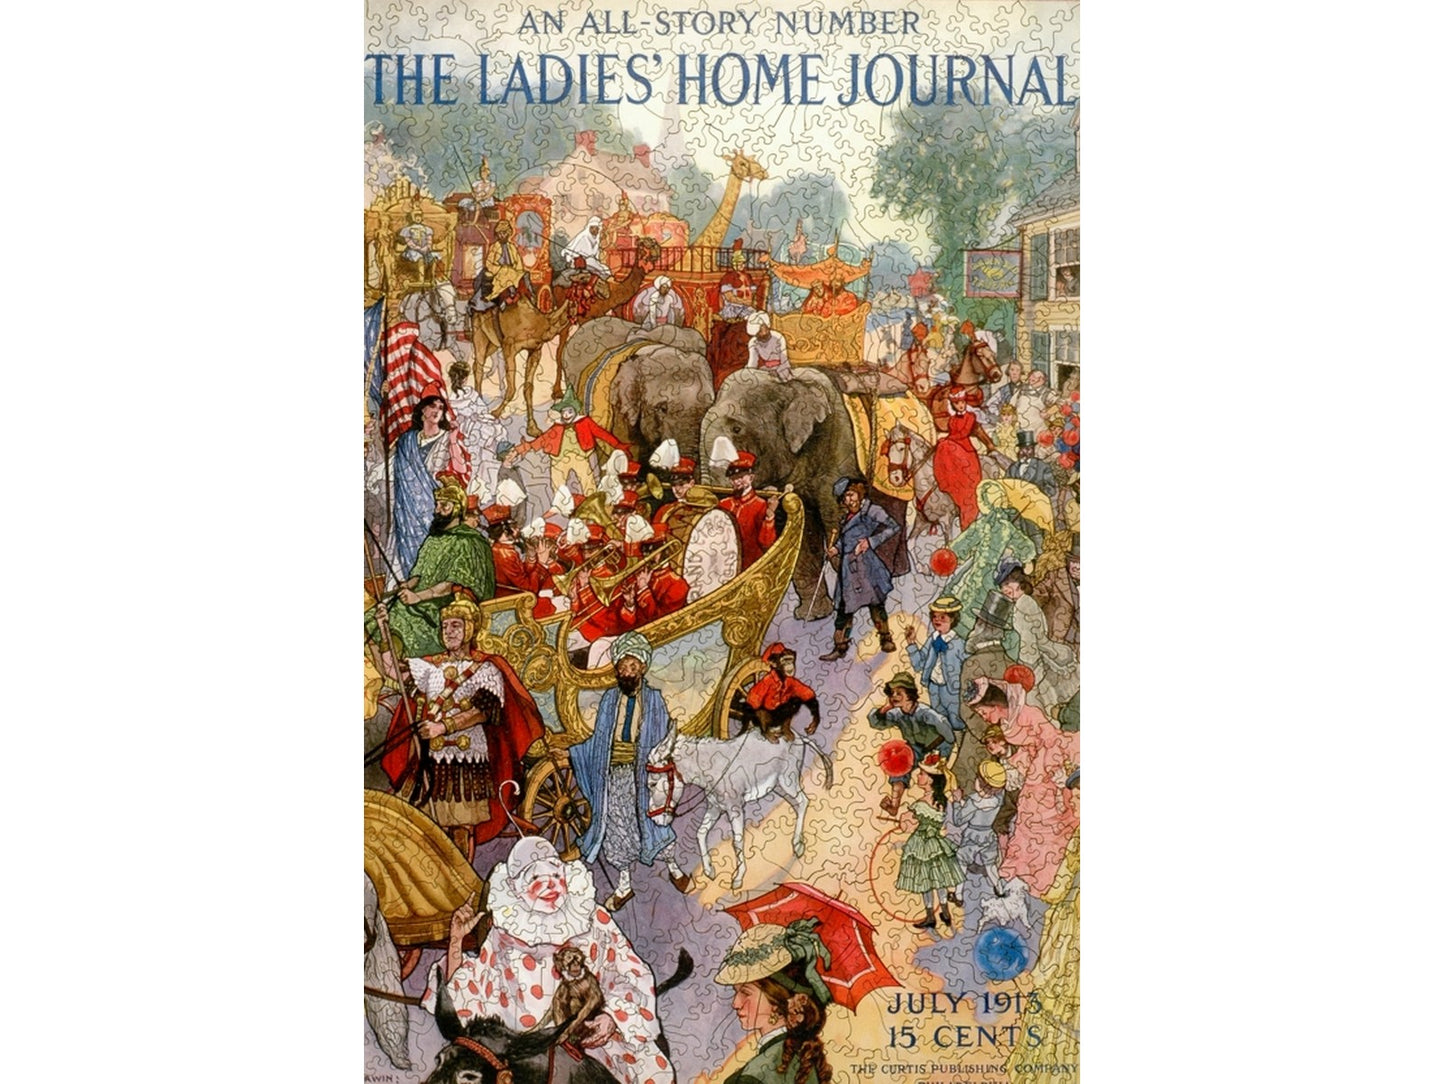 The front of the puzzle, Ladies Home Journal All-Story Number, which shows a circus parade of many people and animals